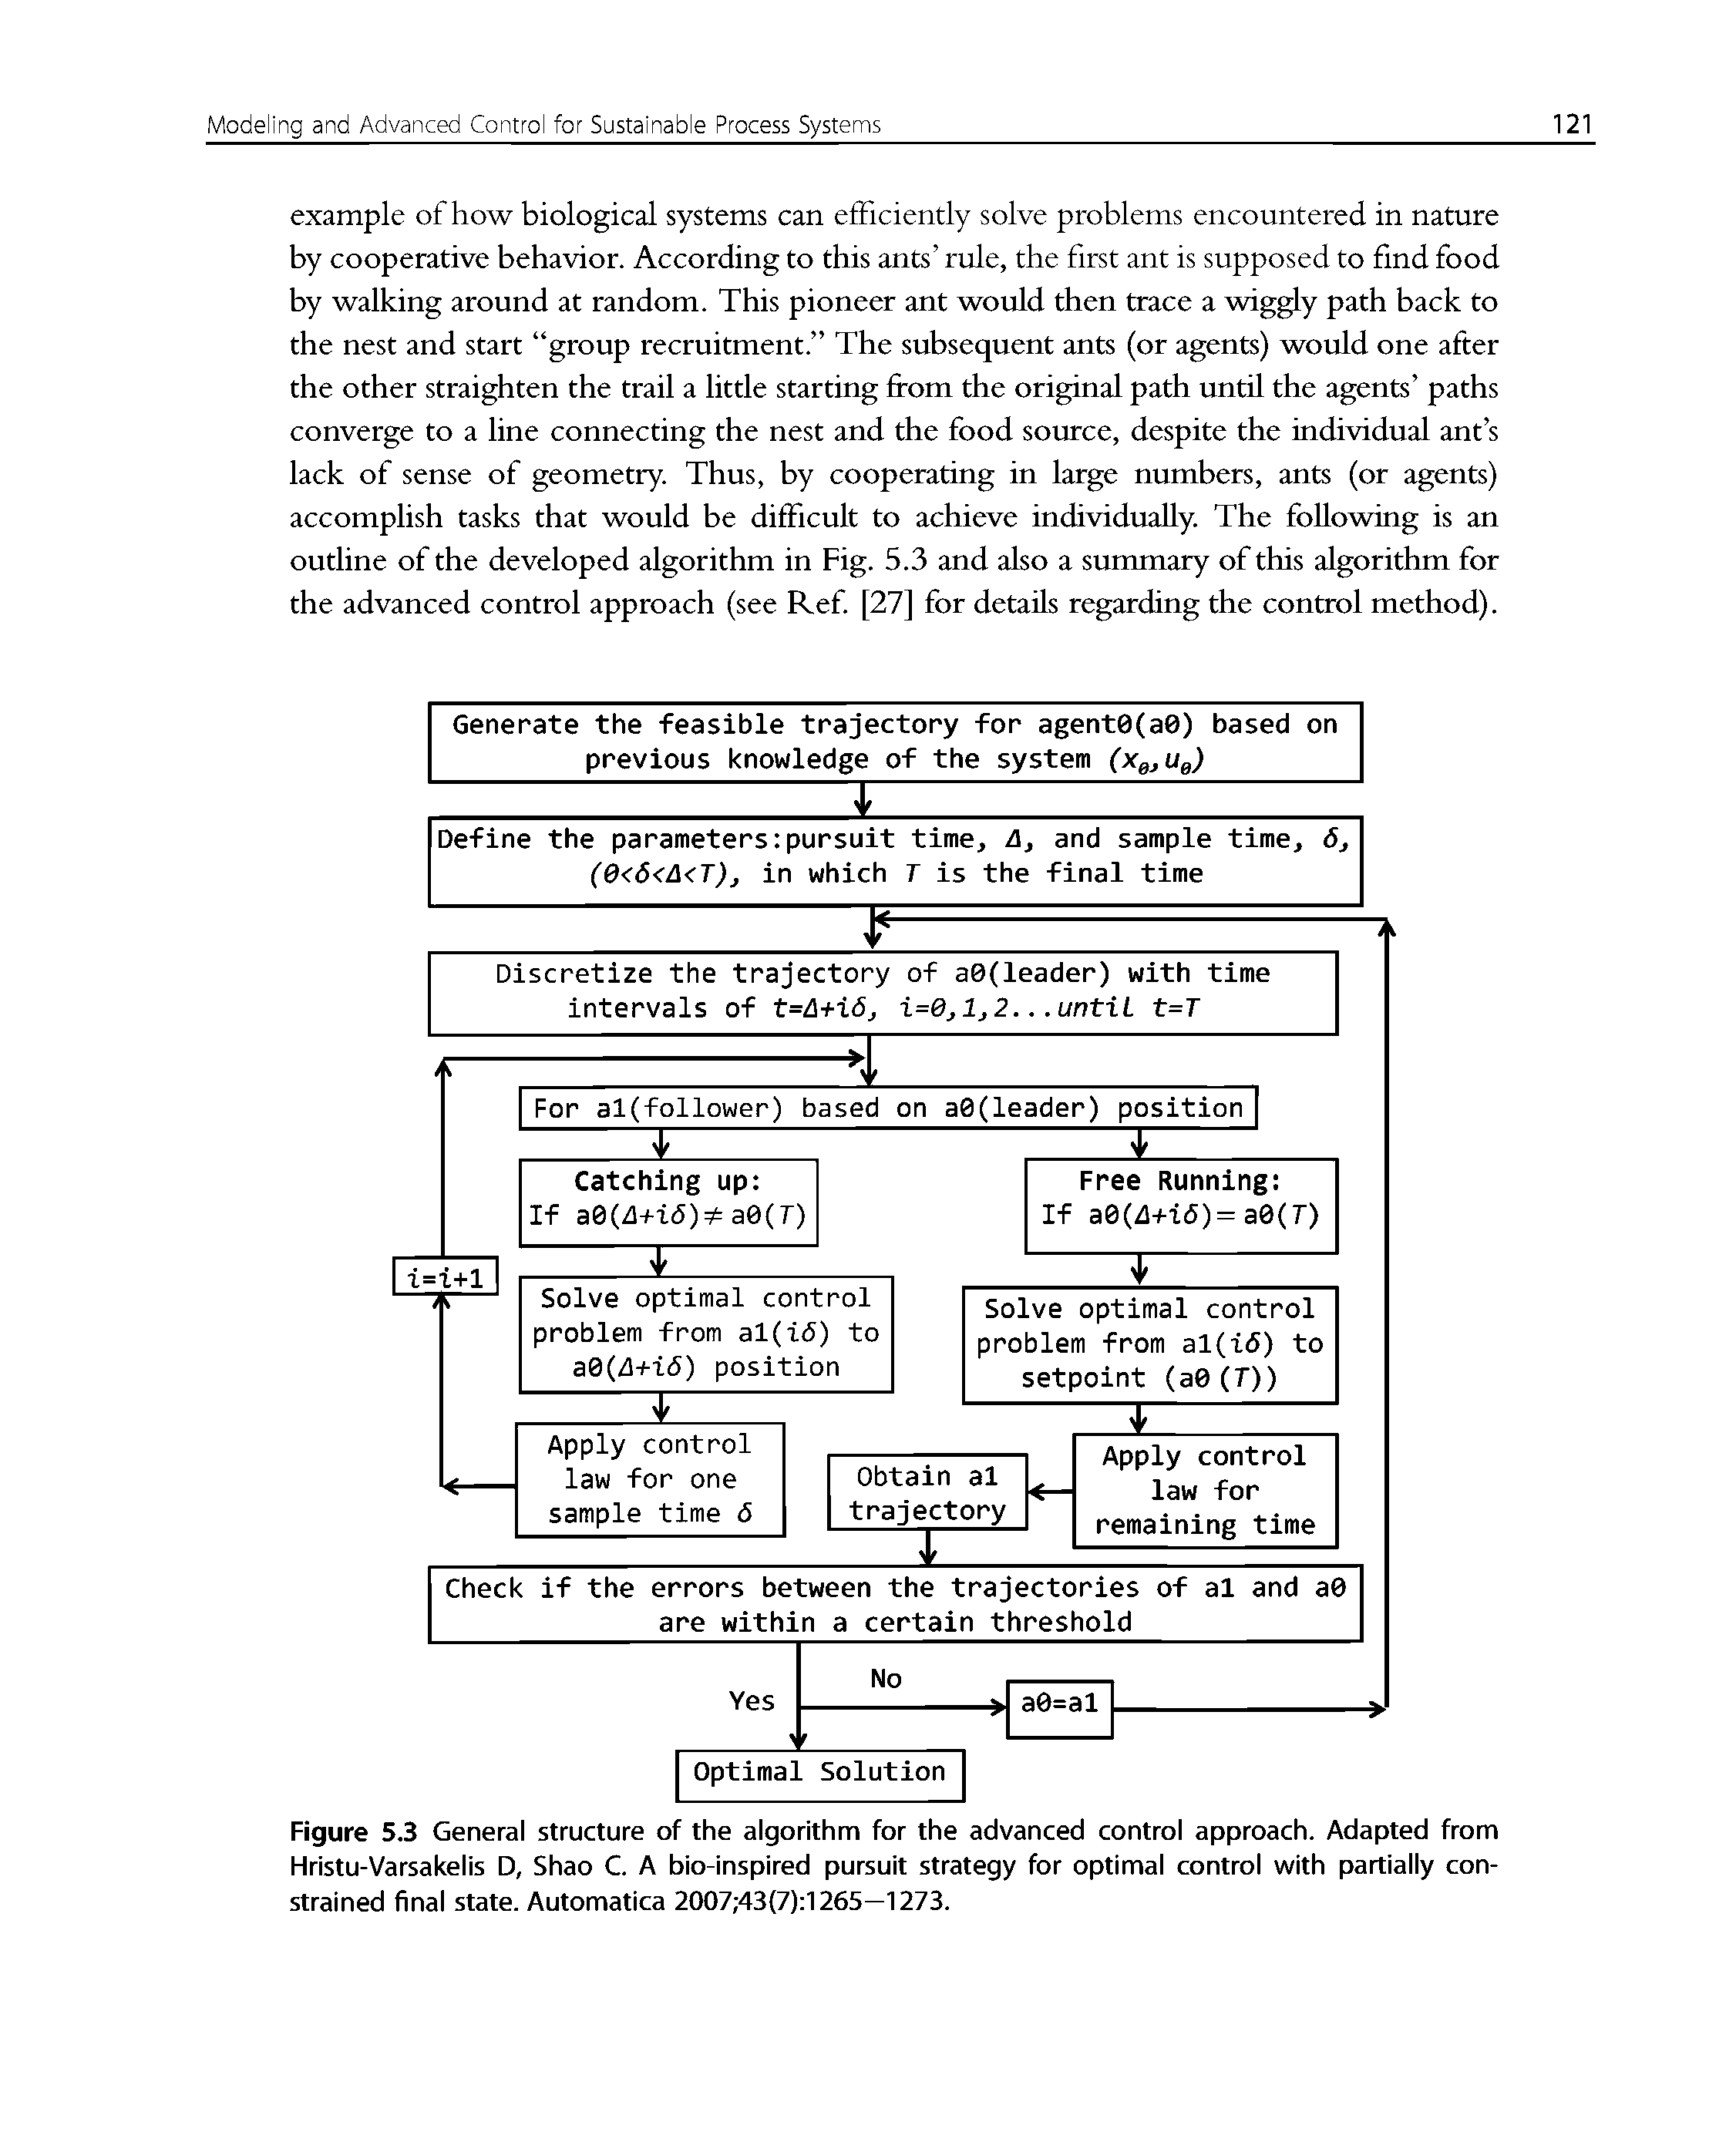 Figure 5.3 General structure of the algorithm for the advanced control approach. Adapted from Hristu-Varsakelis D, Shao C. A bio-inspired pursuit strategy for optimal control with partially constrained final state. Automatica 2007 43(7) 1265—1273.